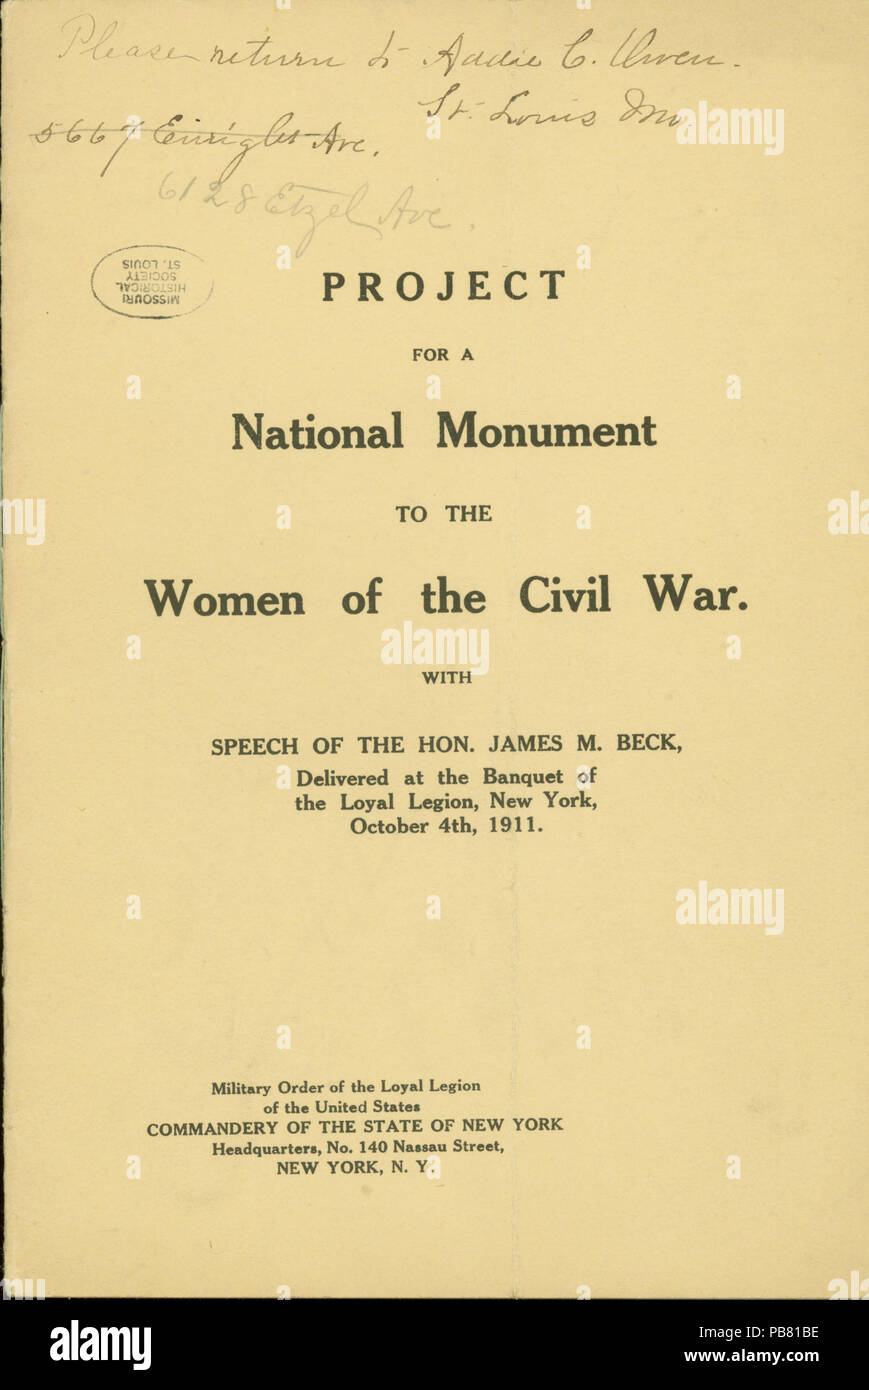 Pamphlet titled “Project for a Monument to the Women of the Civil War,” published by the Commandery of the State of New York, Military Order of the Loyal Legion of the United States, October 4, 1911. Couzins Family Papers, Missouri History Museum Archives, St. Louis. 1160 Pamphlet- “Project for a Monument to the Women of the Civil War,” published by the Commandery of the State of New York, Military Order of the Loyal Legion of the United States, October 4, 1911 Stock Photo